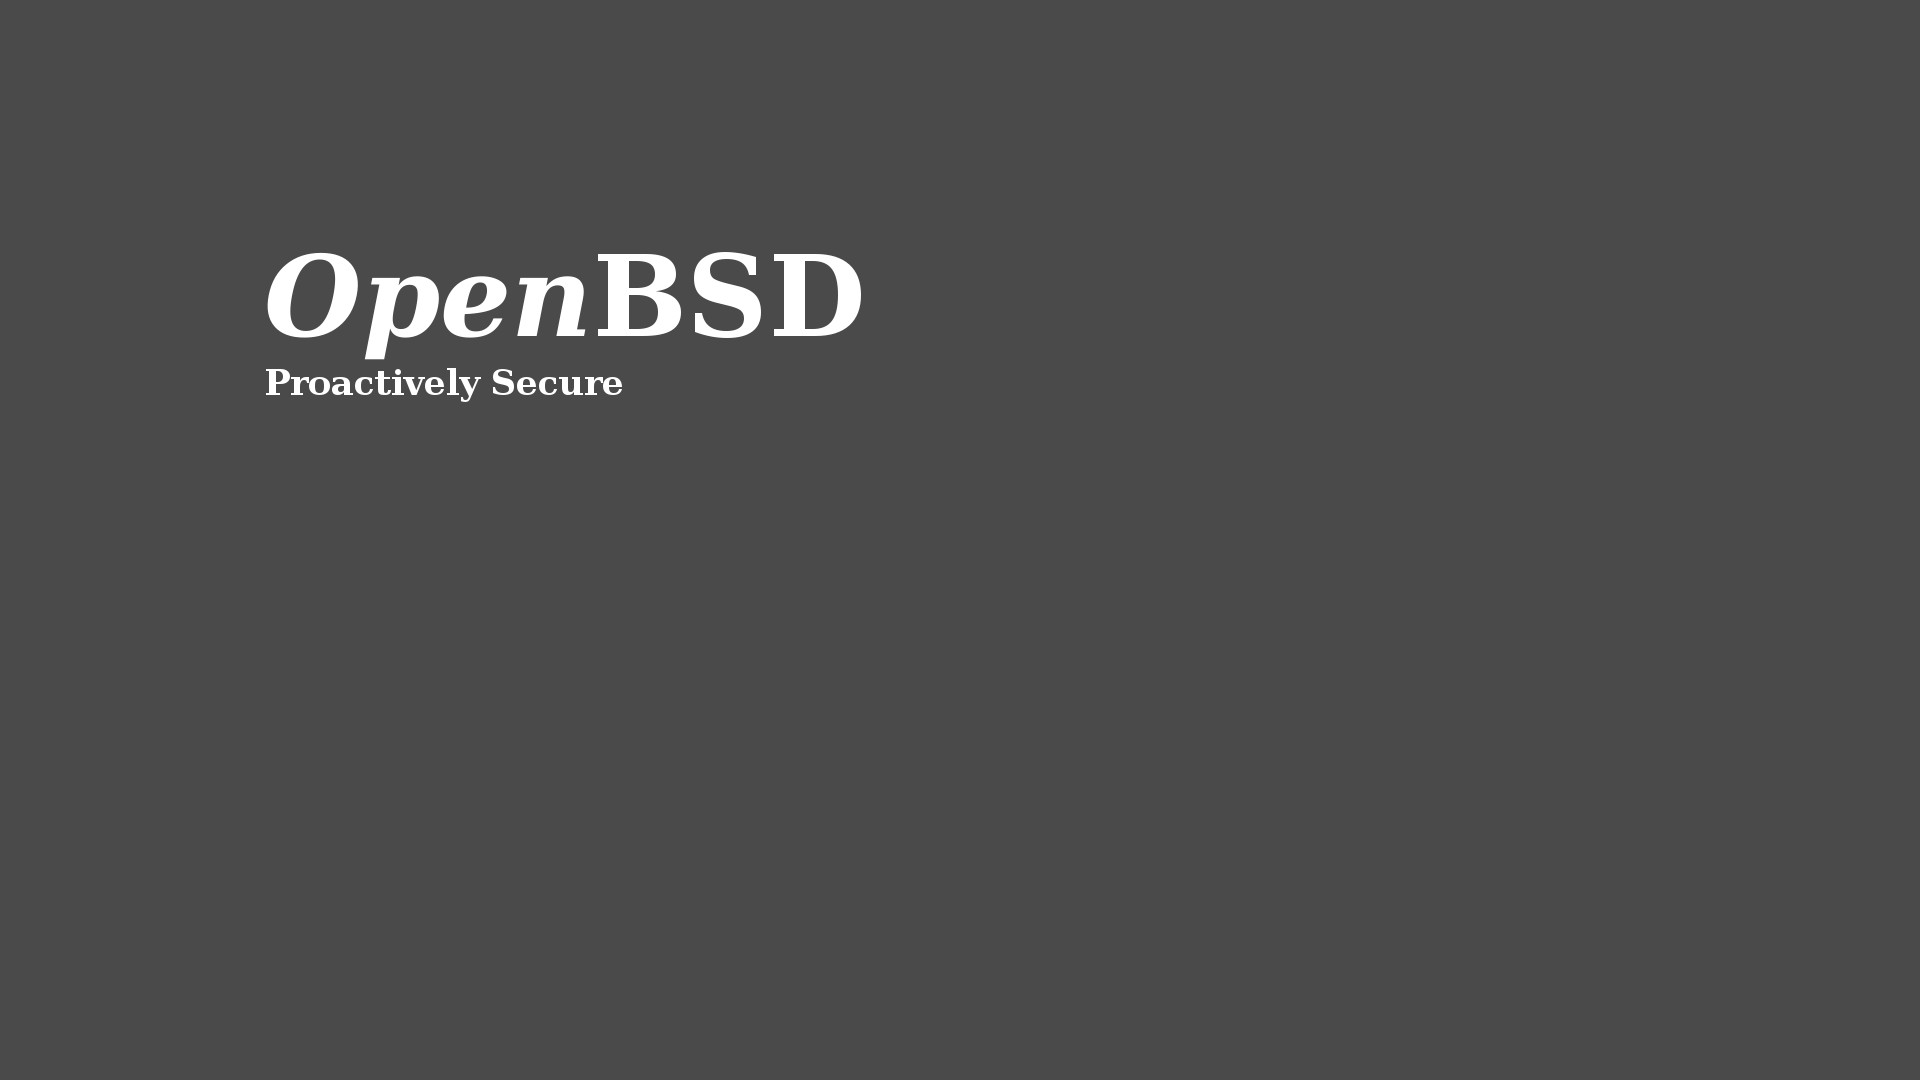 1920x1080 OpenBSD wallpaper I made. Going for simple and tasteful. Someone else may  enjoy it too.